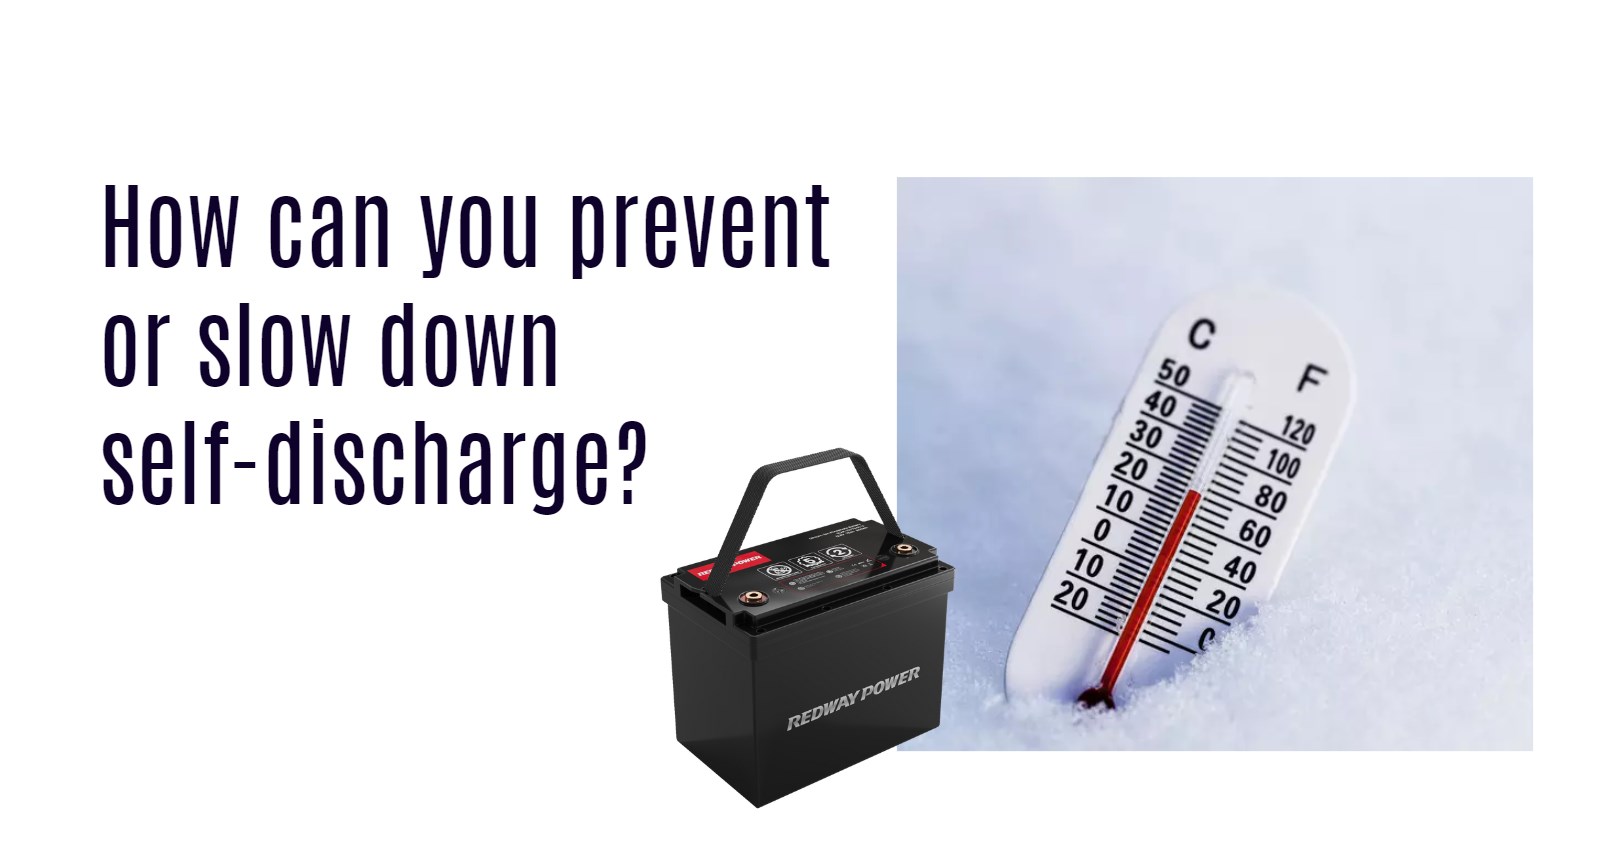 How can you prevent or slow down self-discharge? 25 degrees